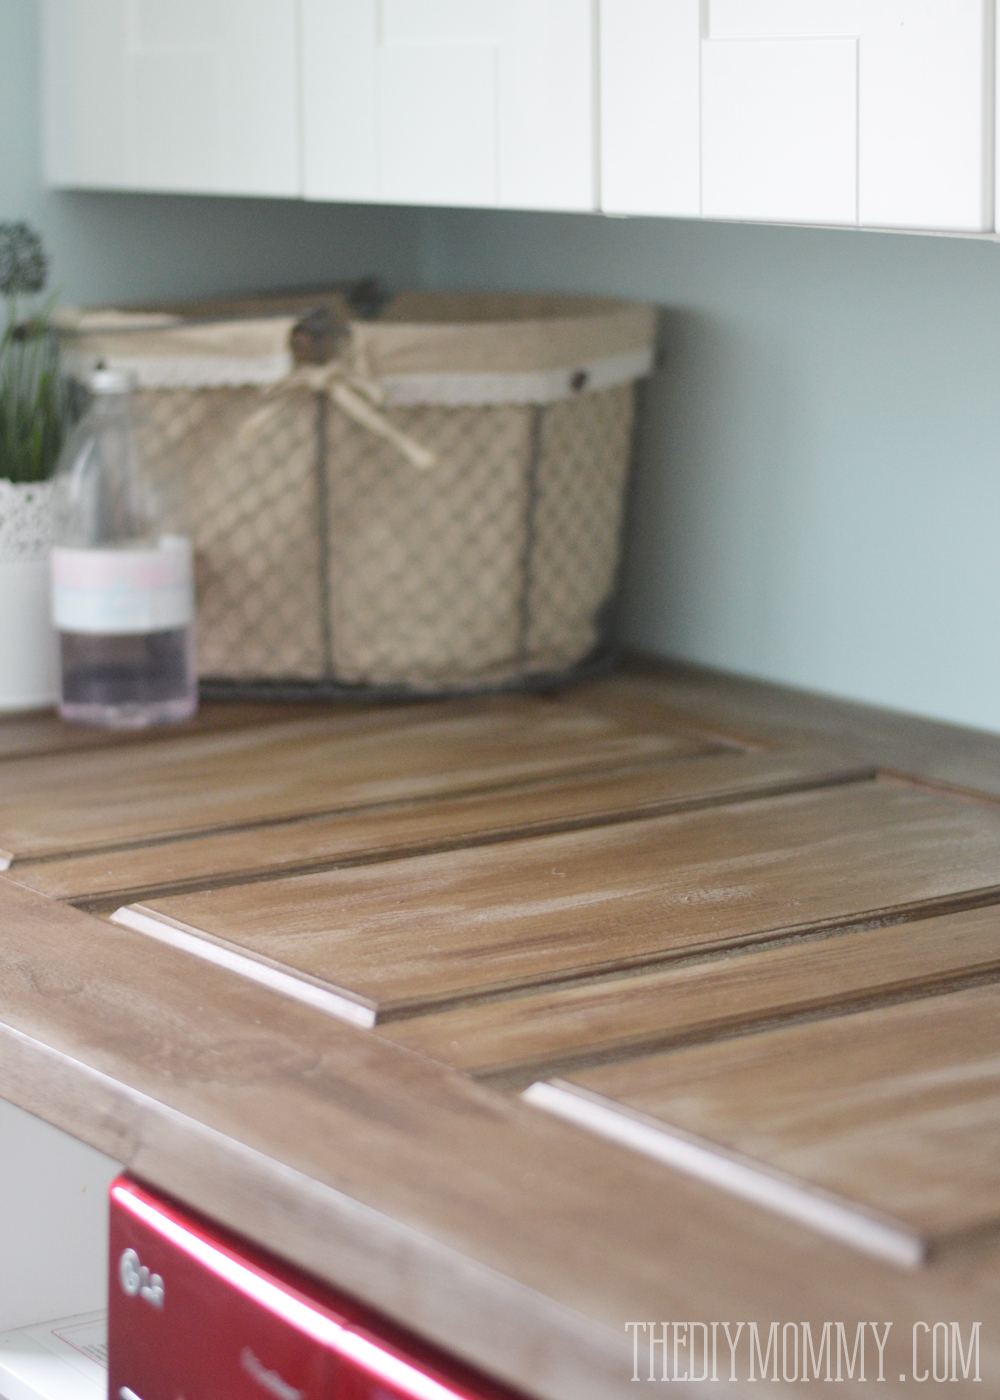 Make a Laundry Room Countertop from an Old Door